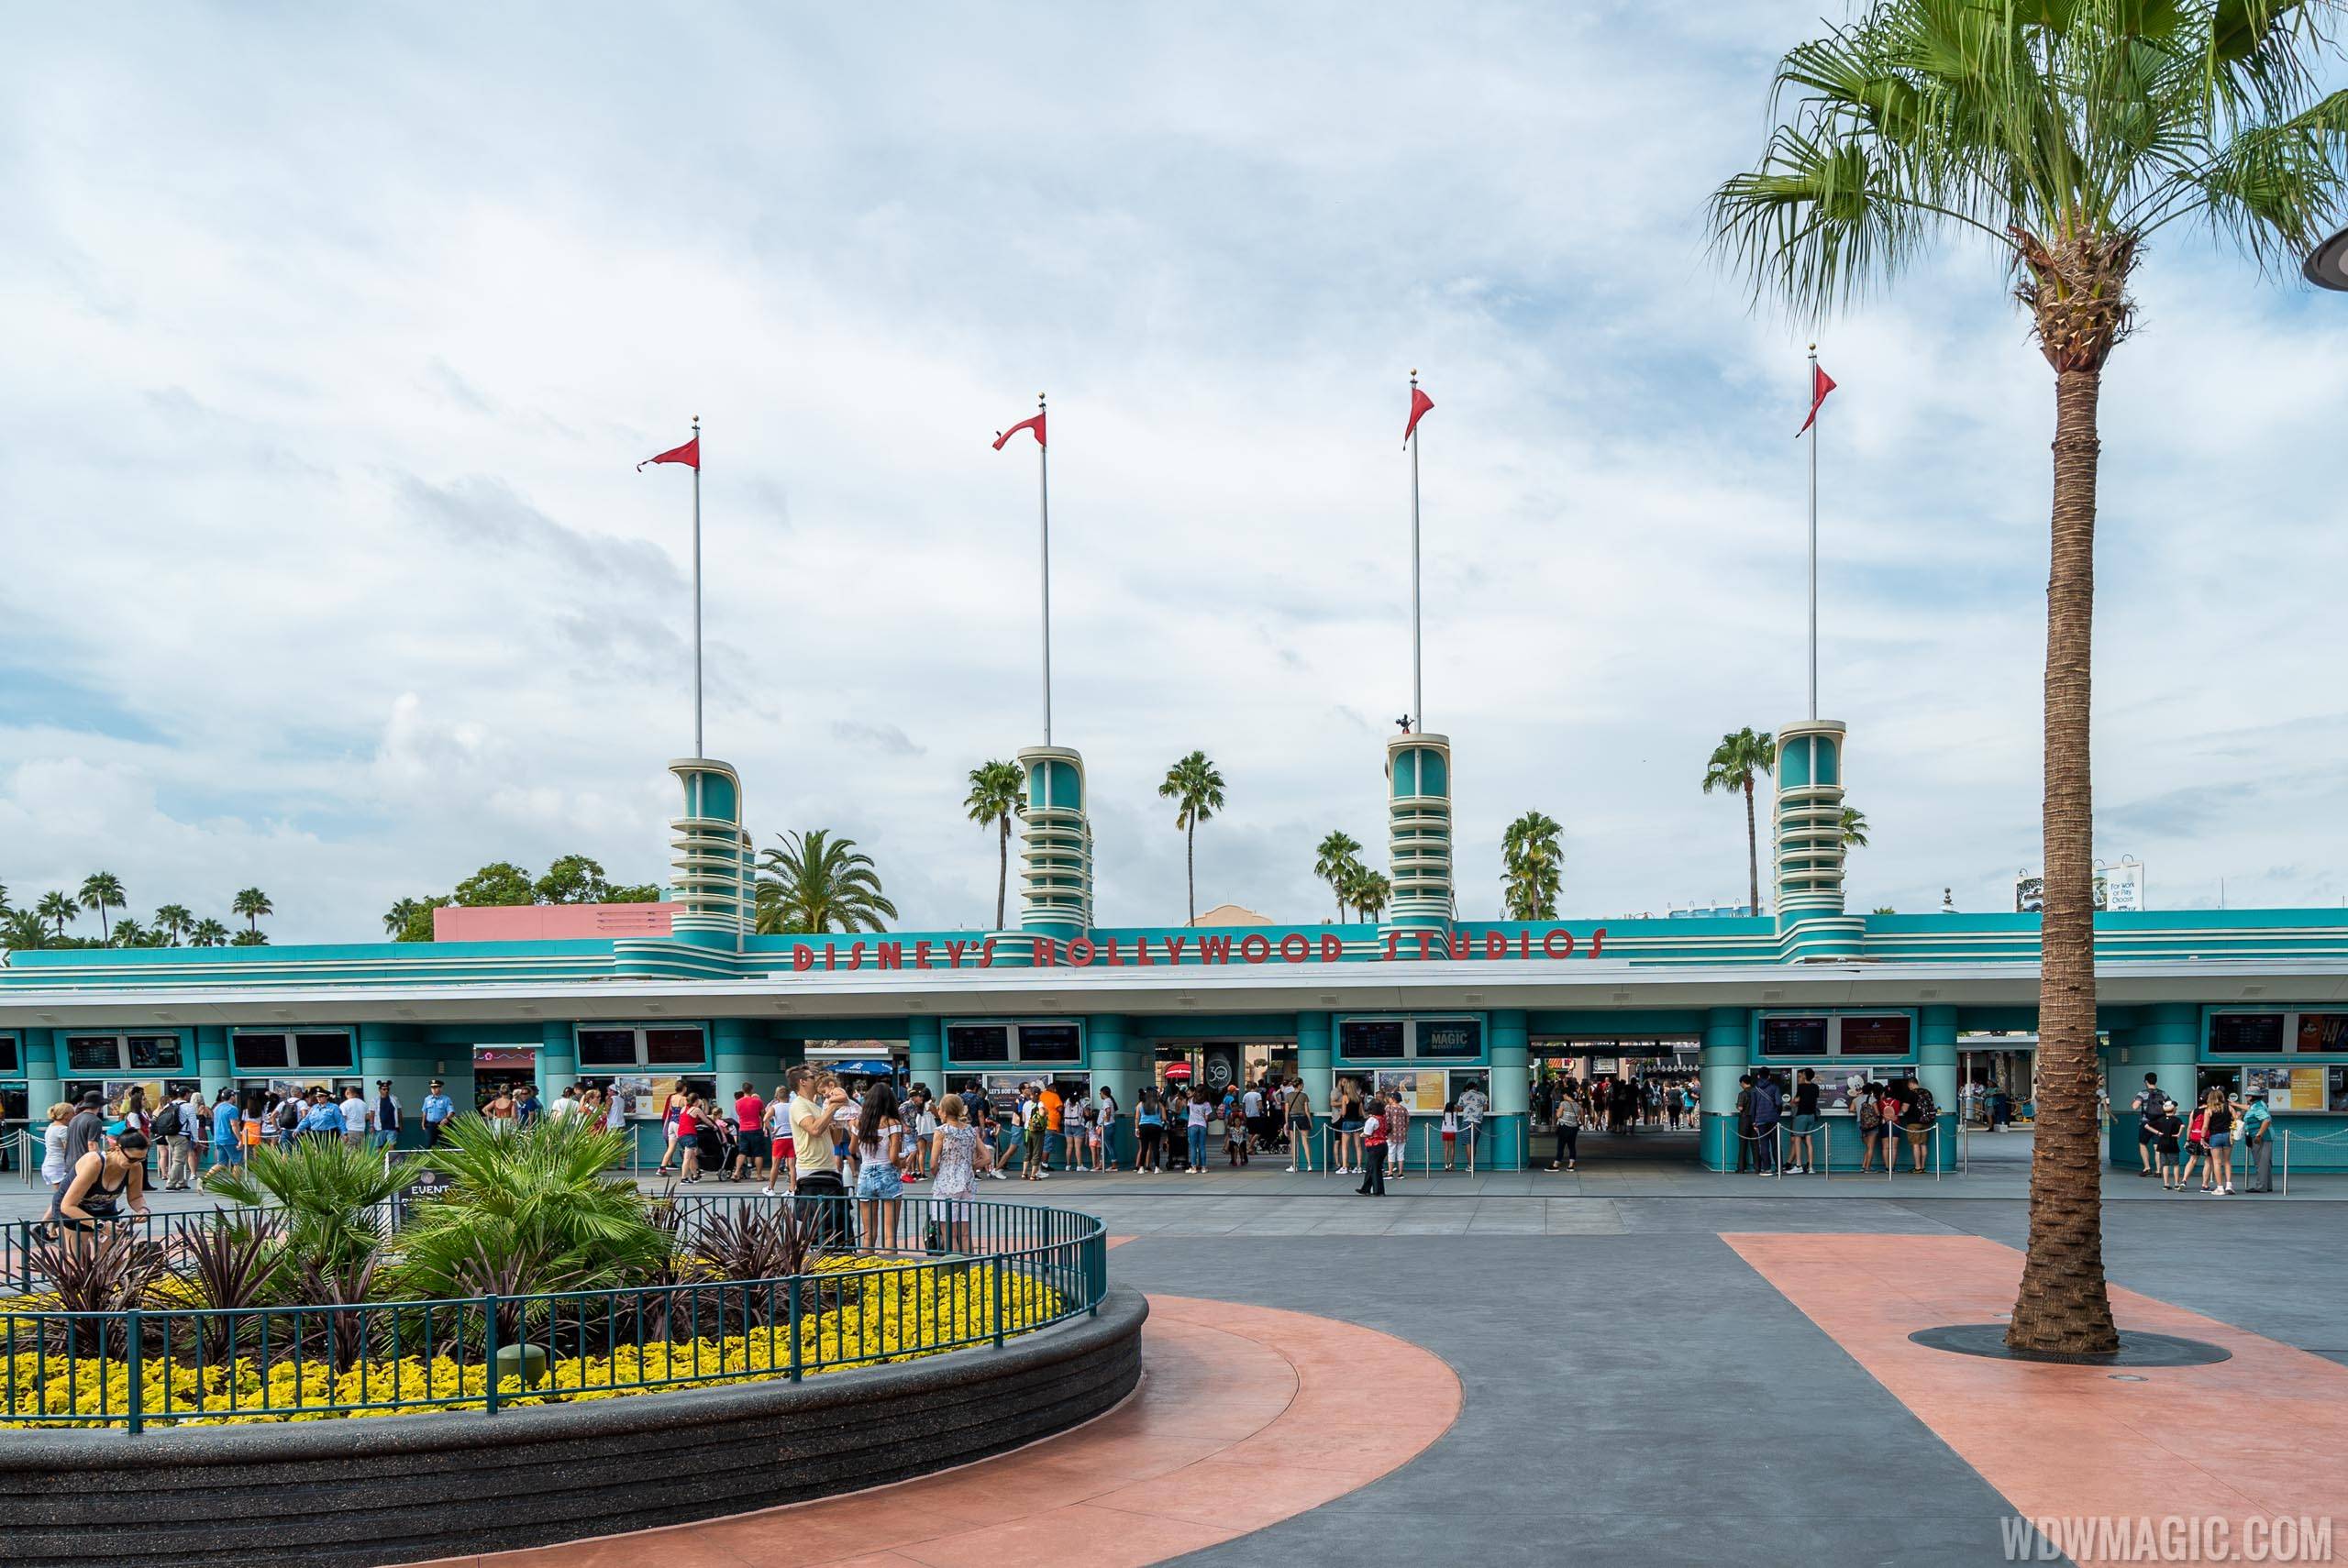 Disney's Hollywood Studios completed main entrance